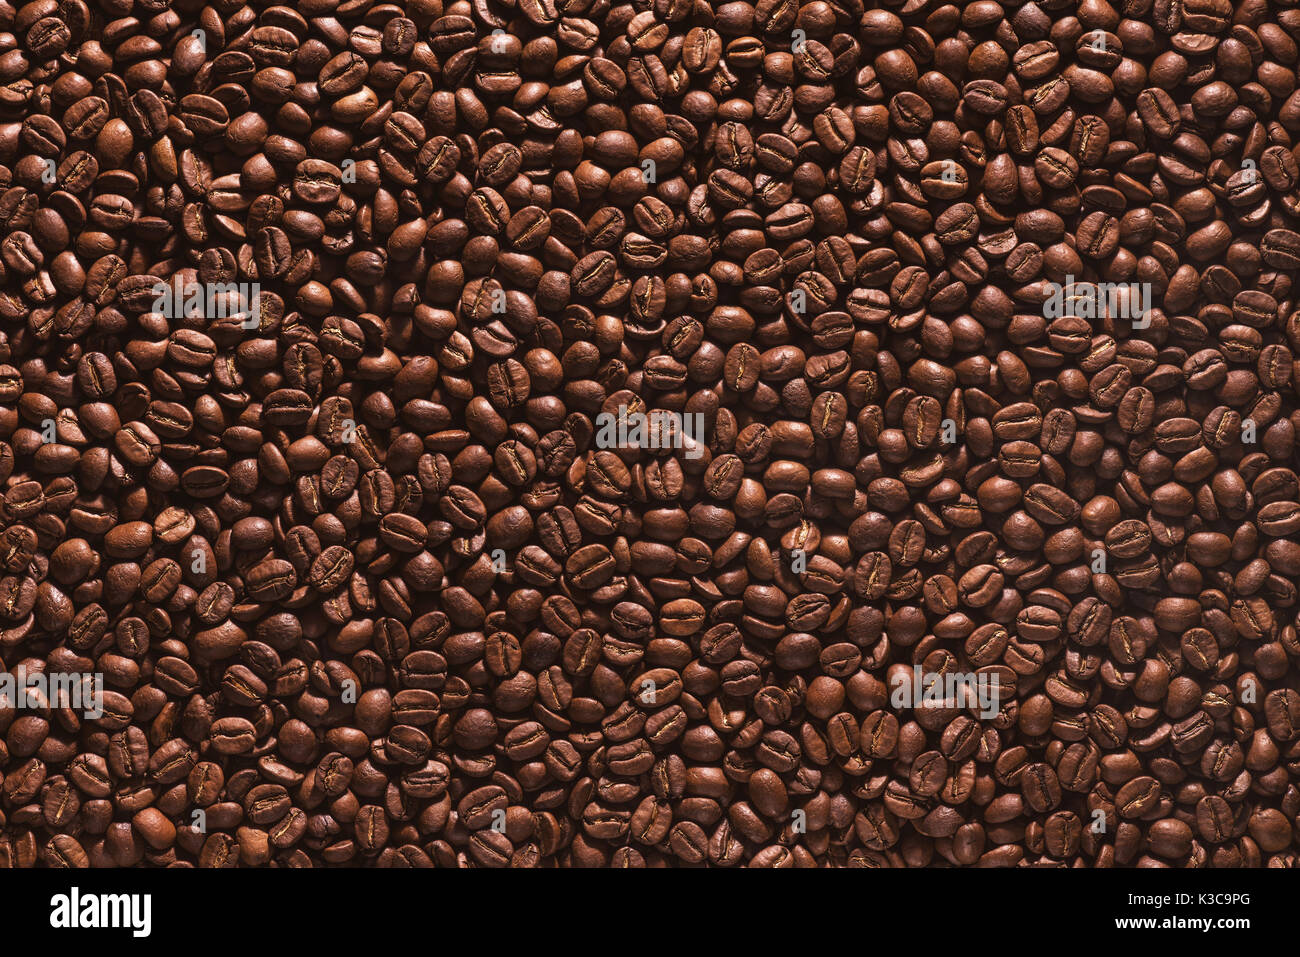 Roasted coffee beans on a flat background. Stock Photo